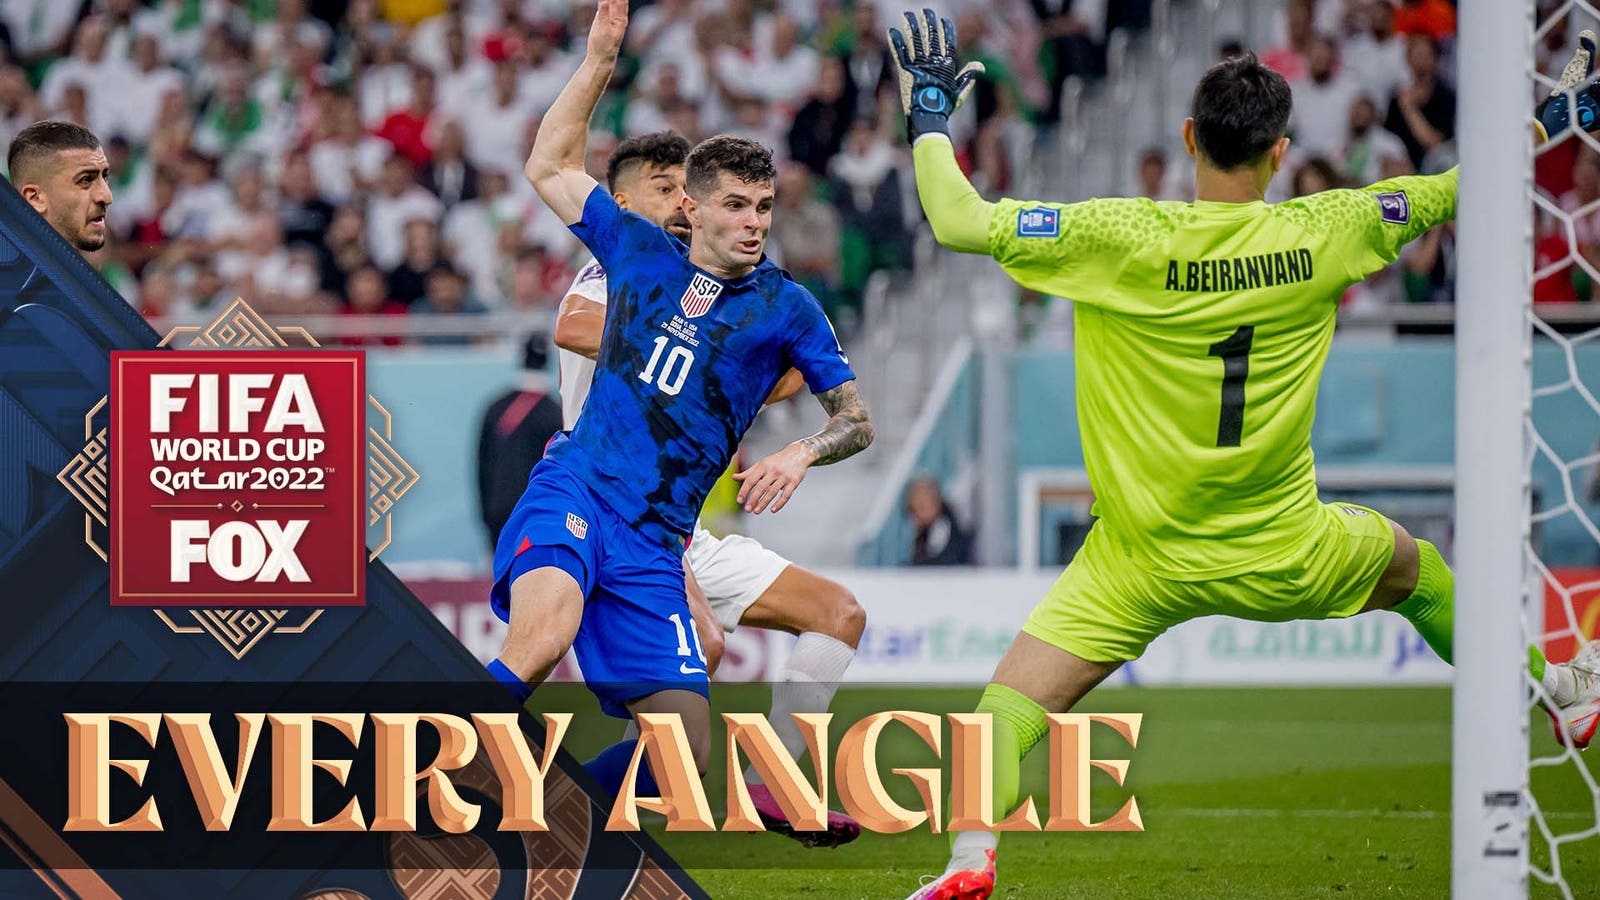 Christian Pulisic's gutsy goal against Iran in the 2022 FIFA World Cup